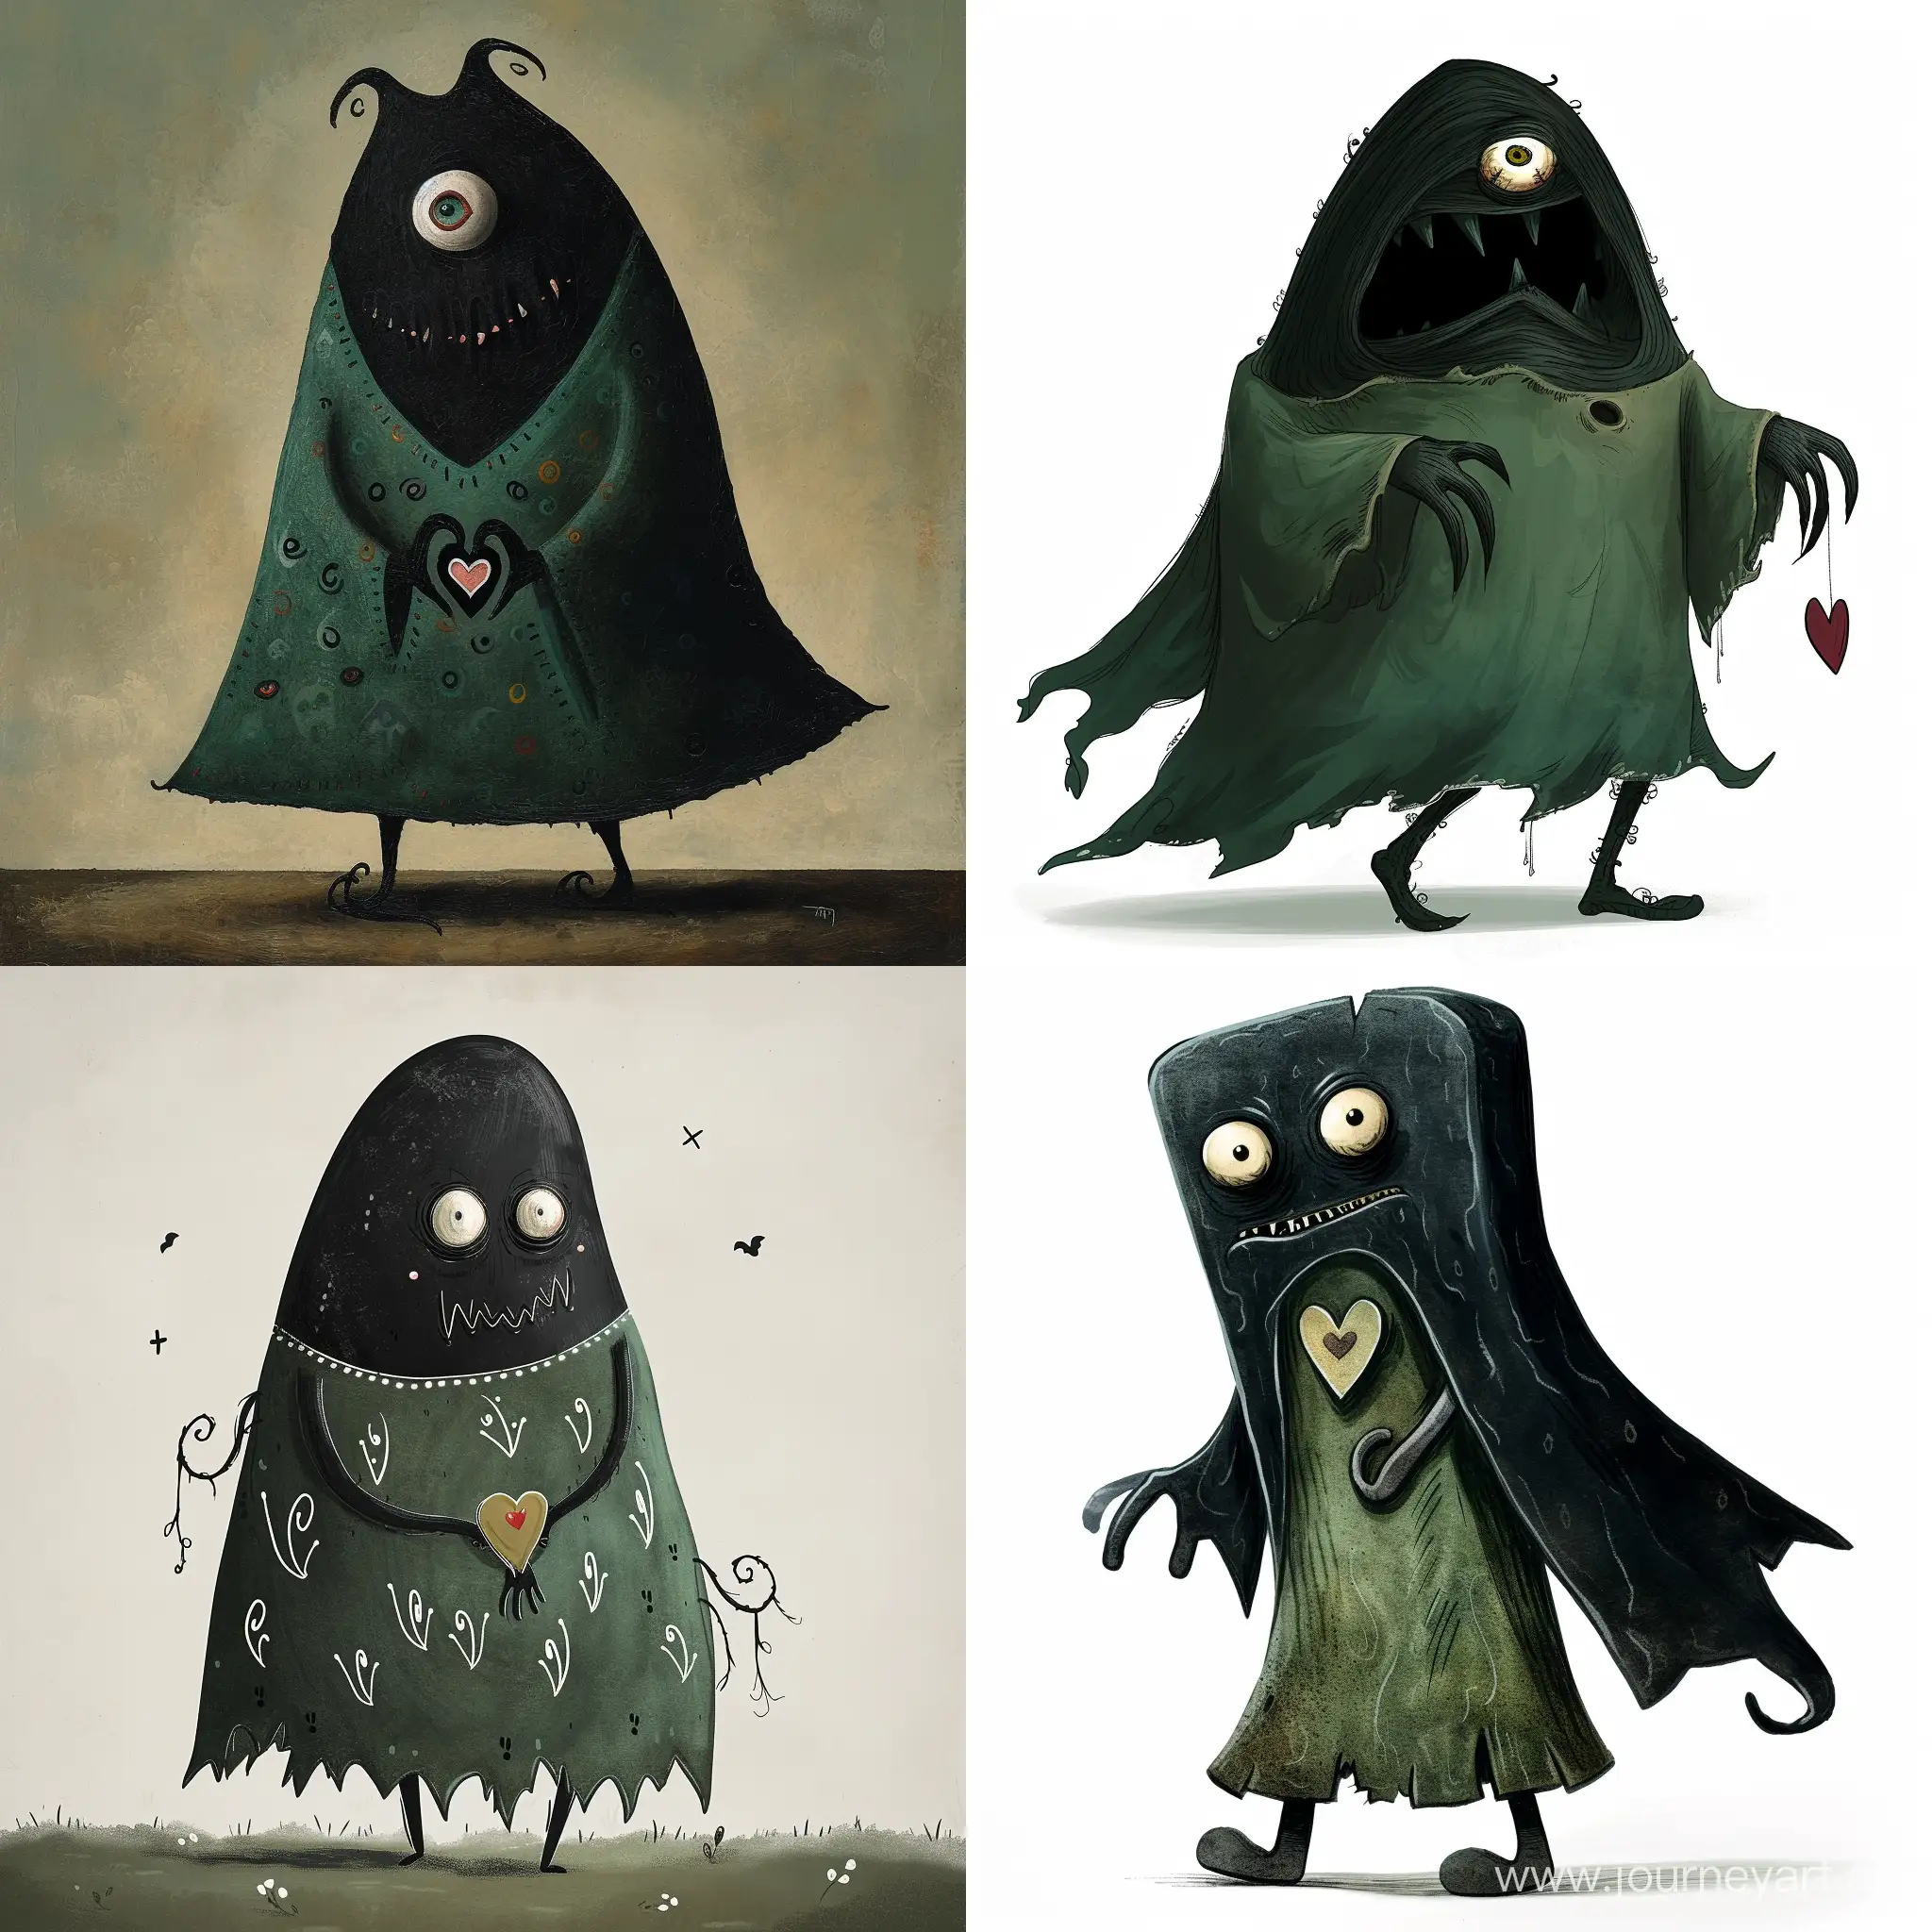 Big black spooky figure with a scary face who walks in a green robe and has one eye and has a heart in his hands